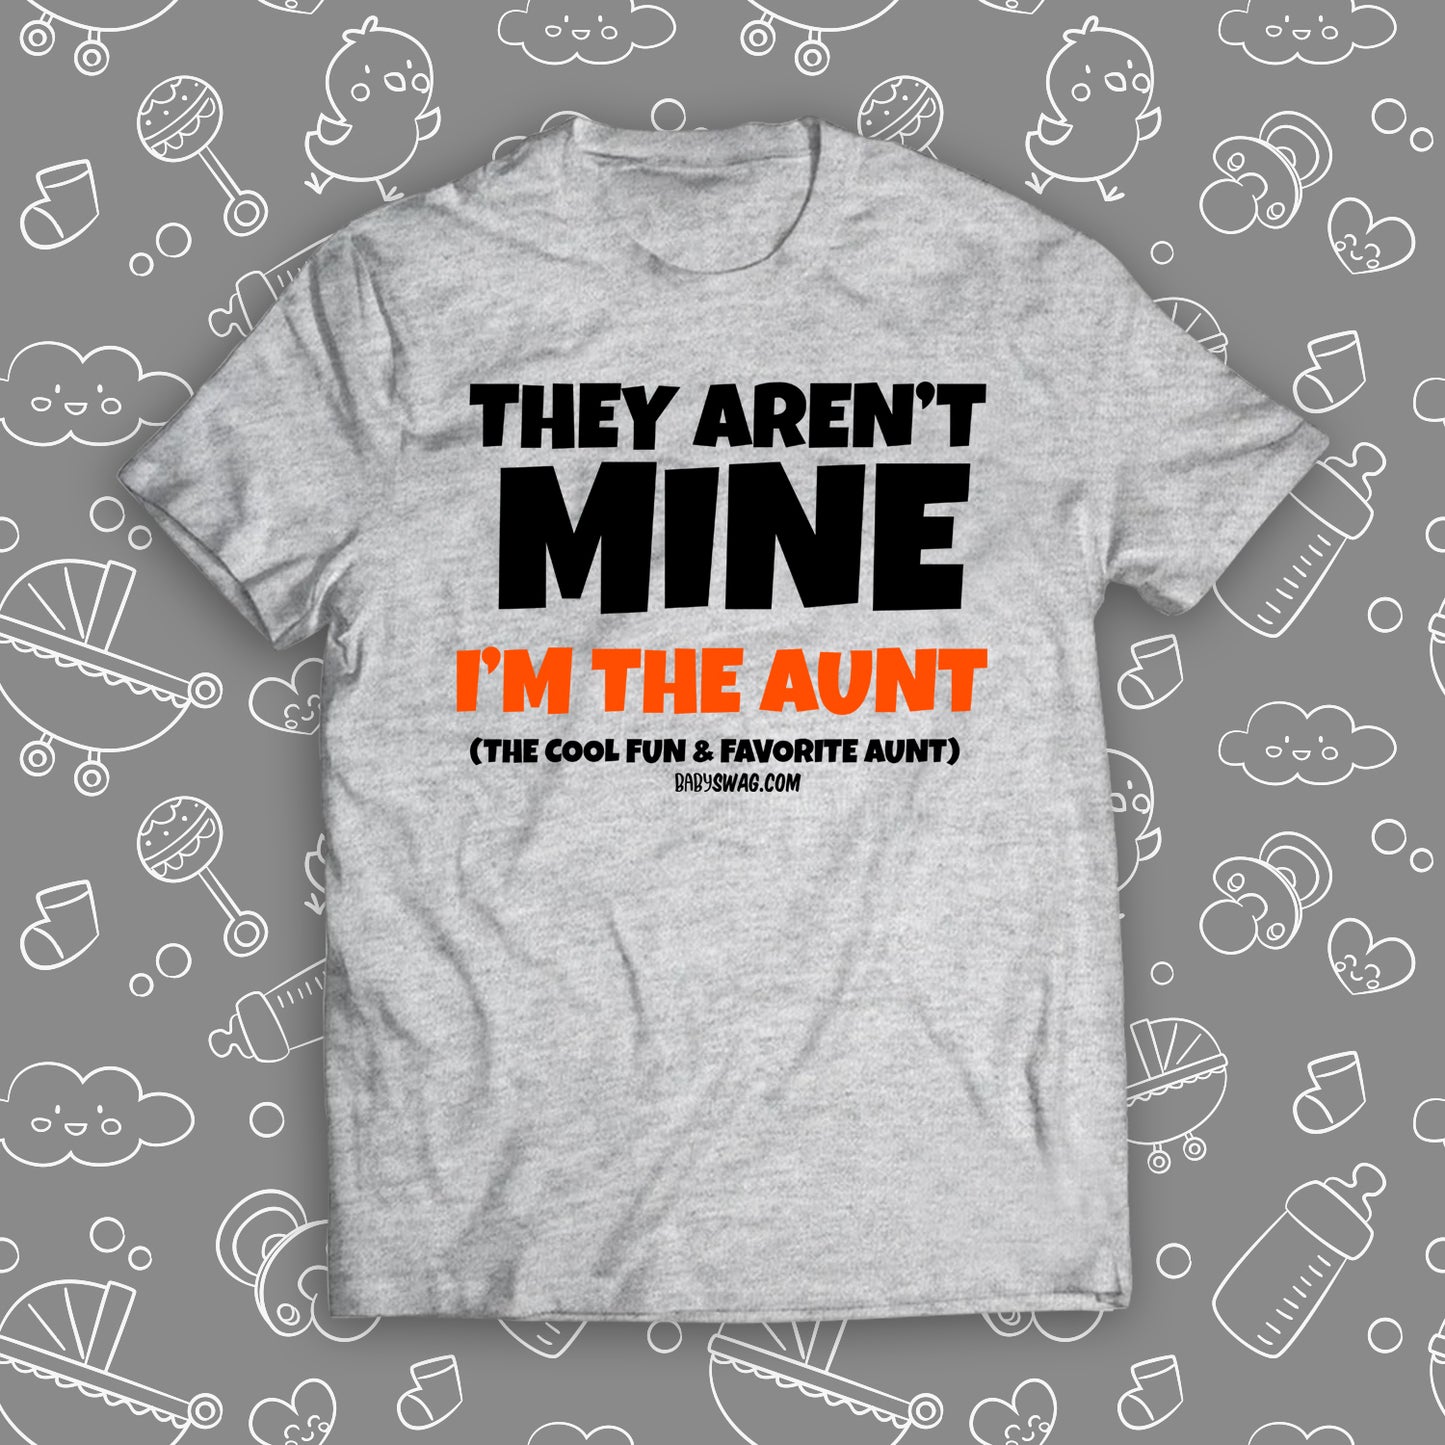 They Aren't Mine, I'm The Aunt